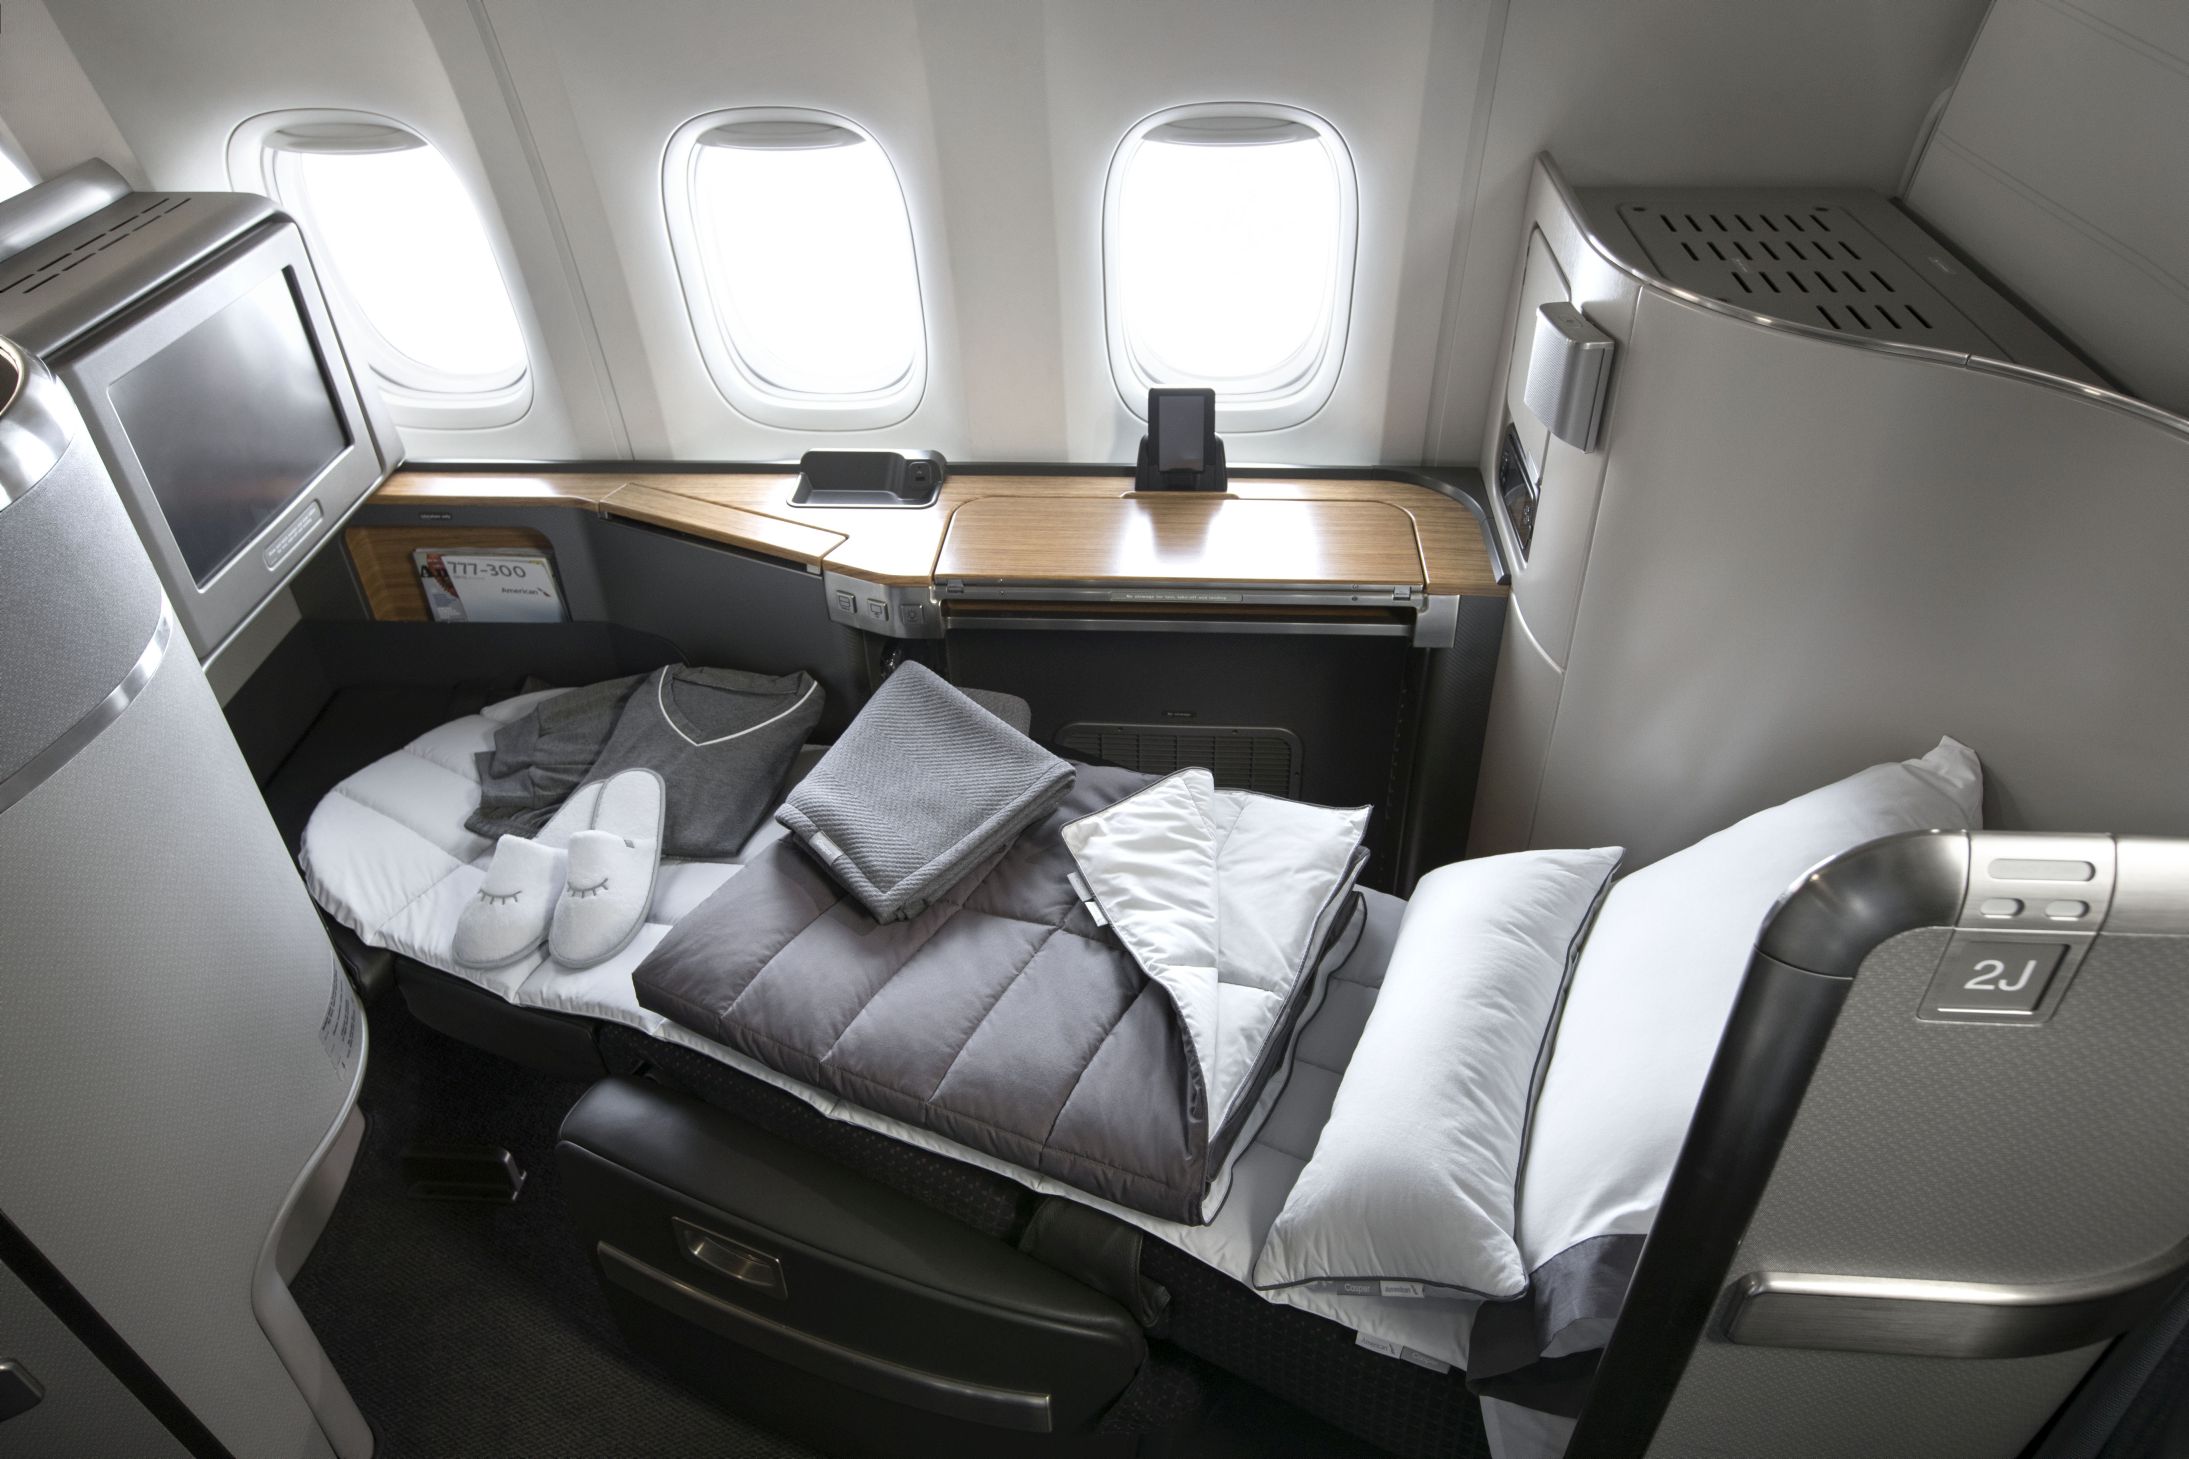 In an effort to ensure the best night’s sleep on its long-haul flights, American Airlines has teamed up with sleep product gurus Casper to introduce new amenities to the airline’s long-haul routes.